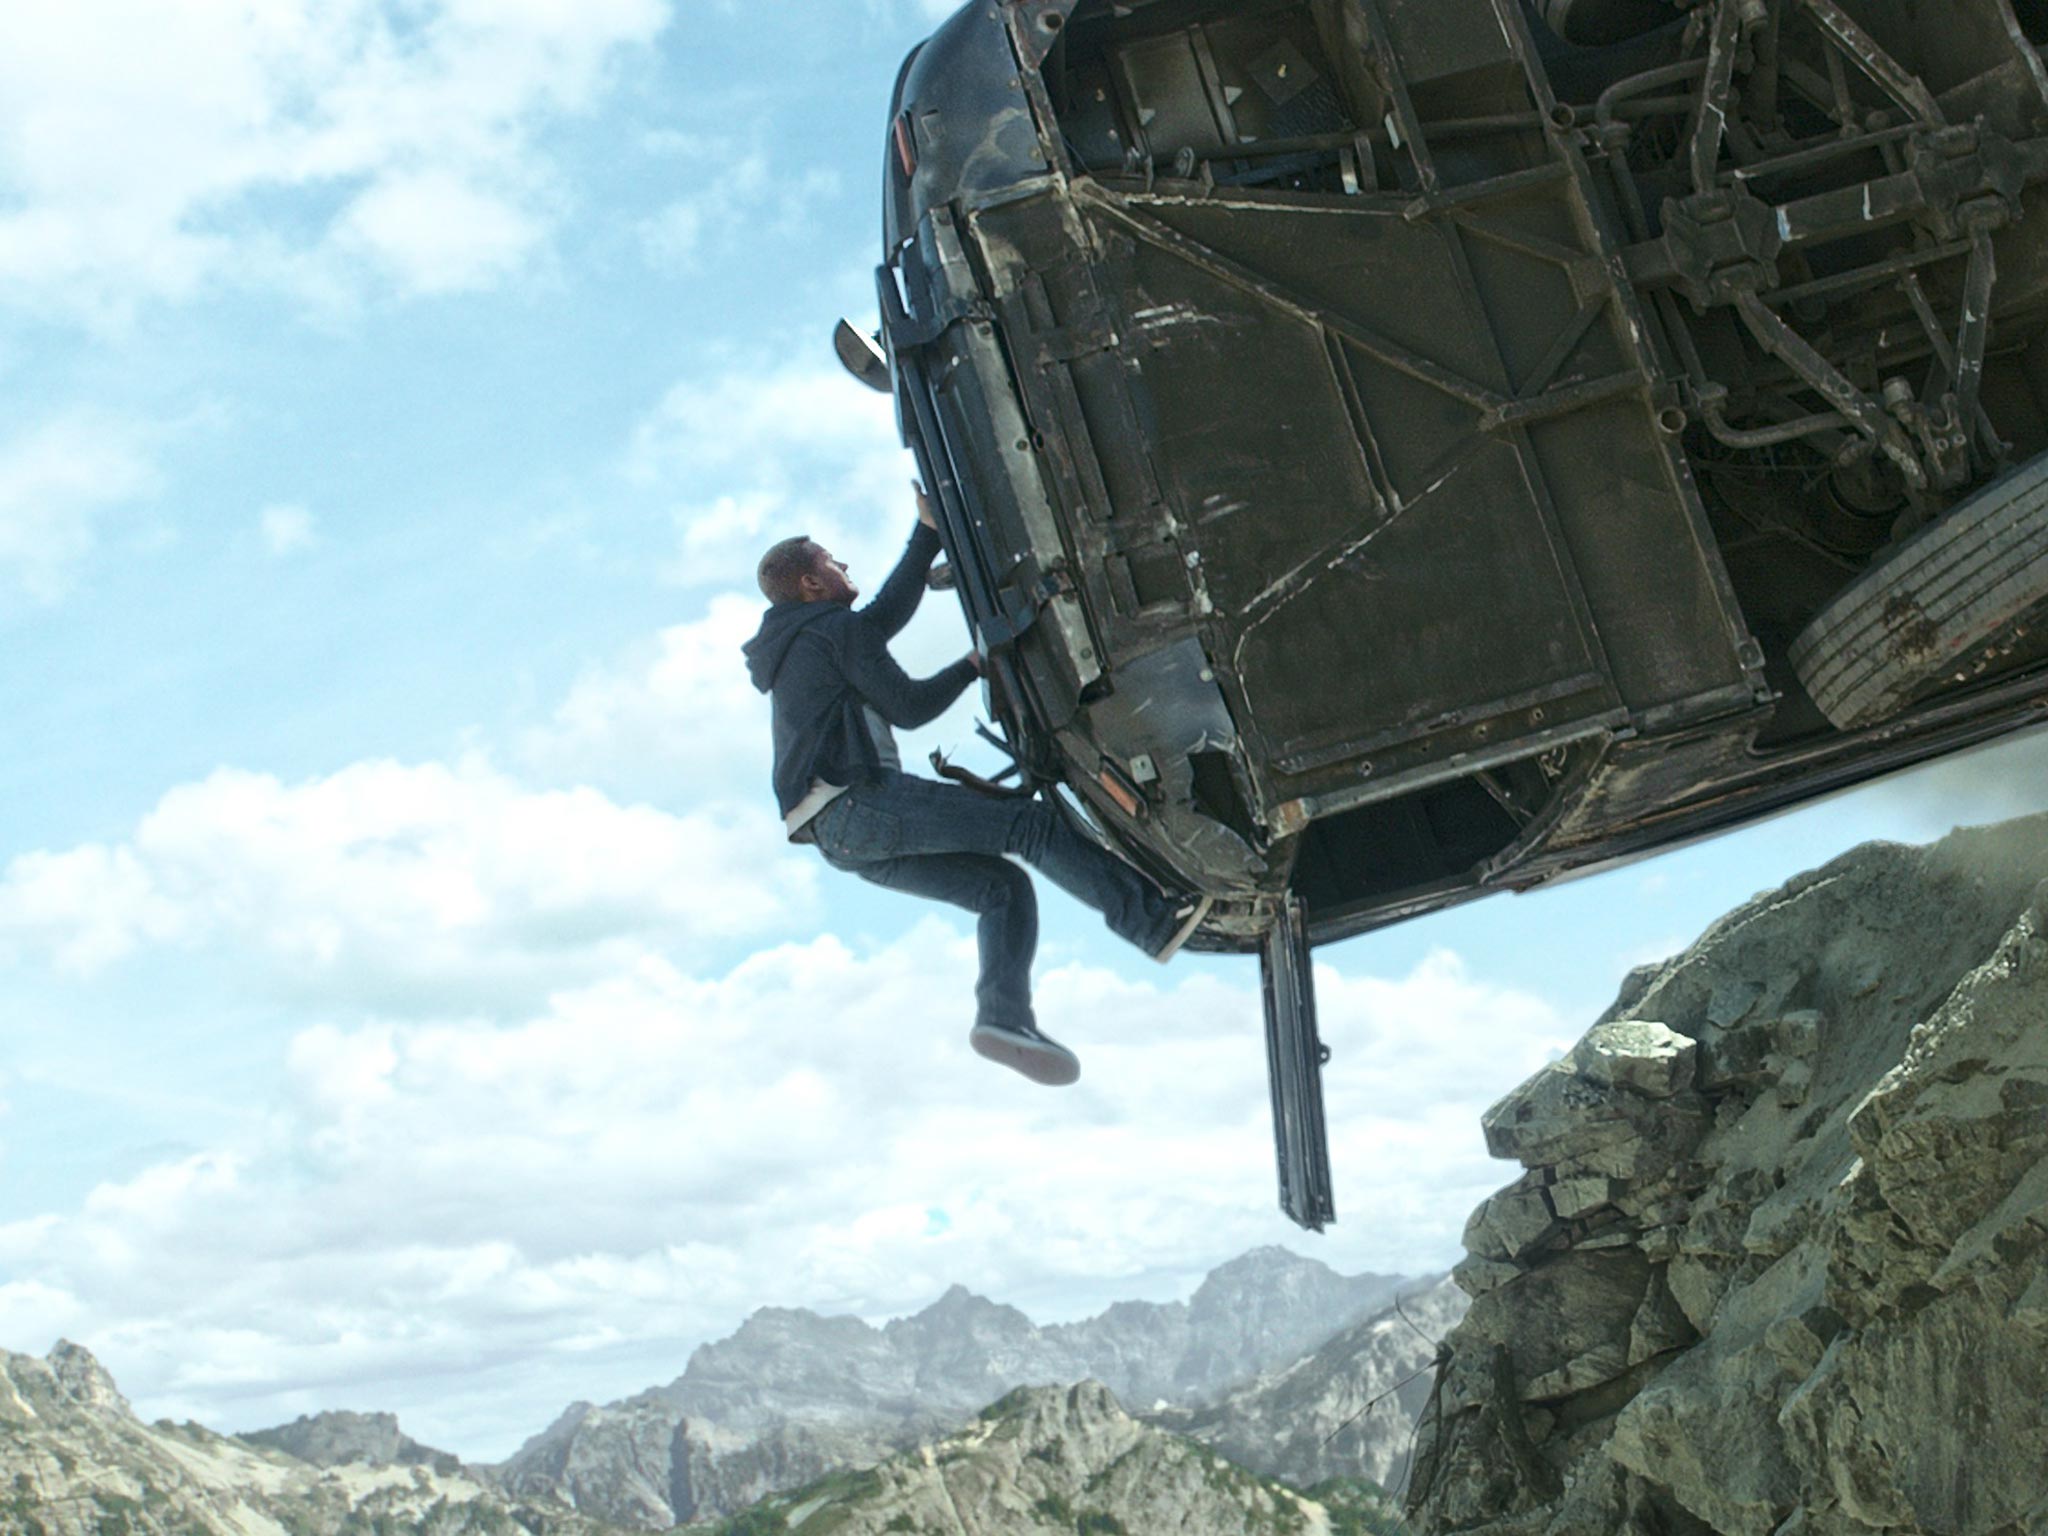 A shot from Fast and Furious 7